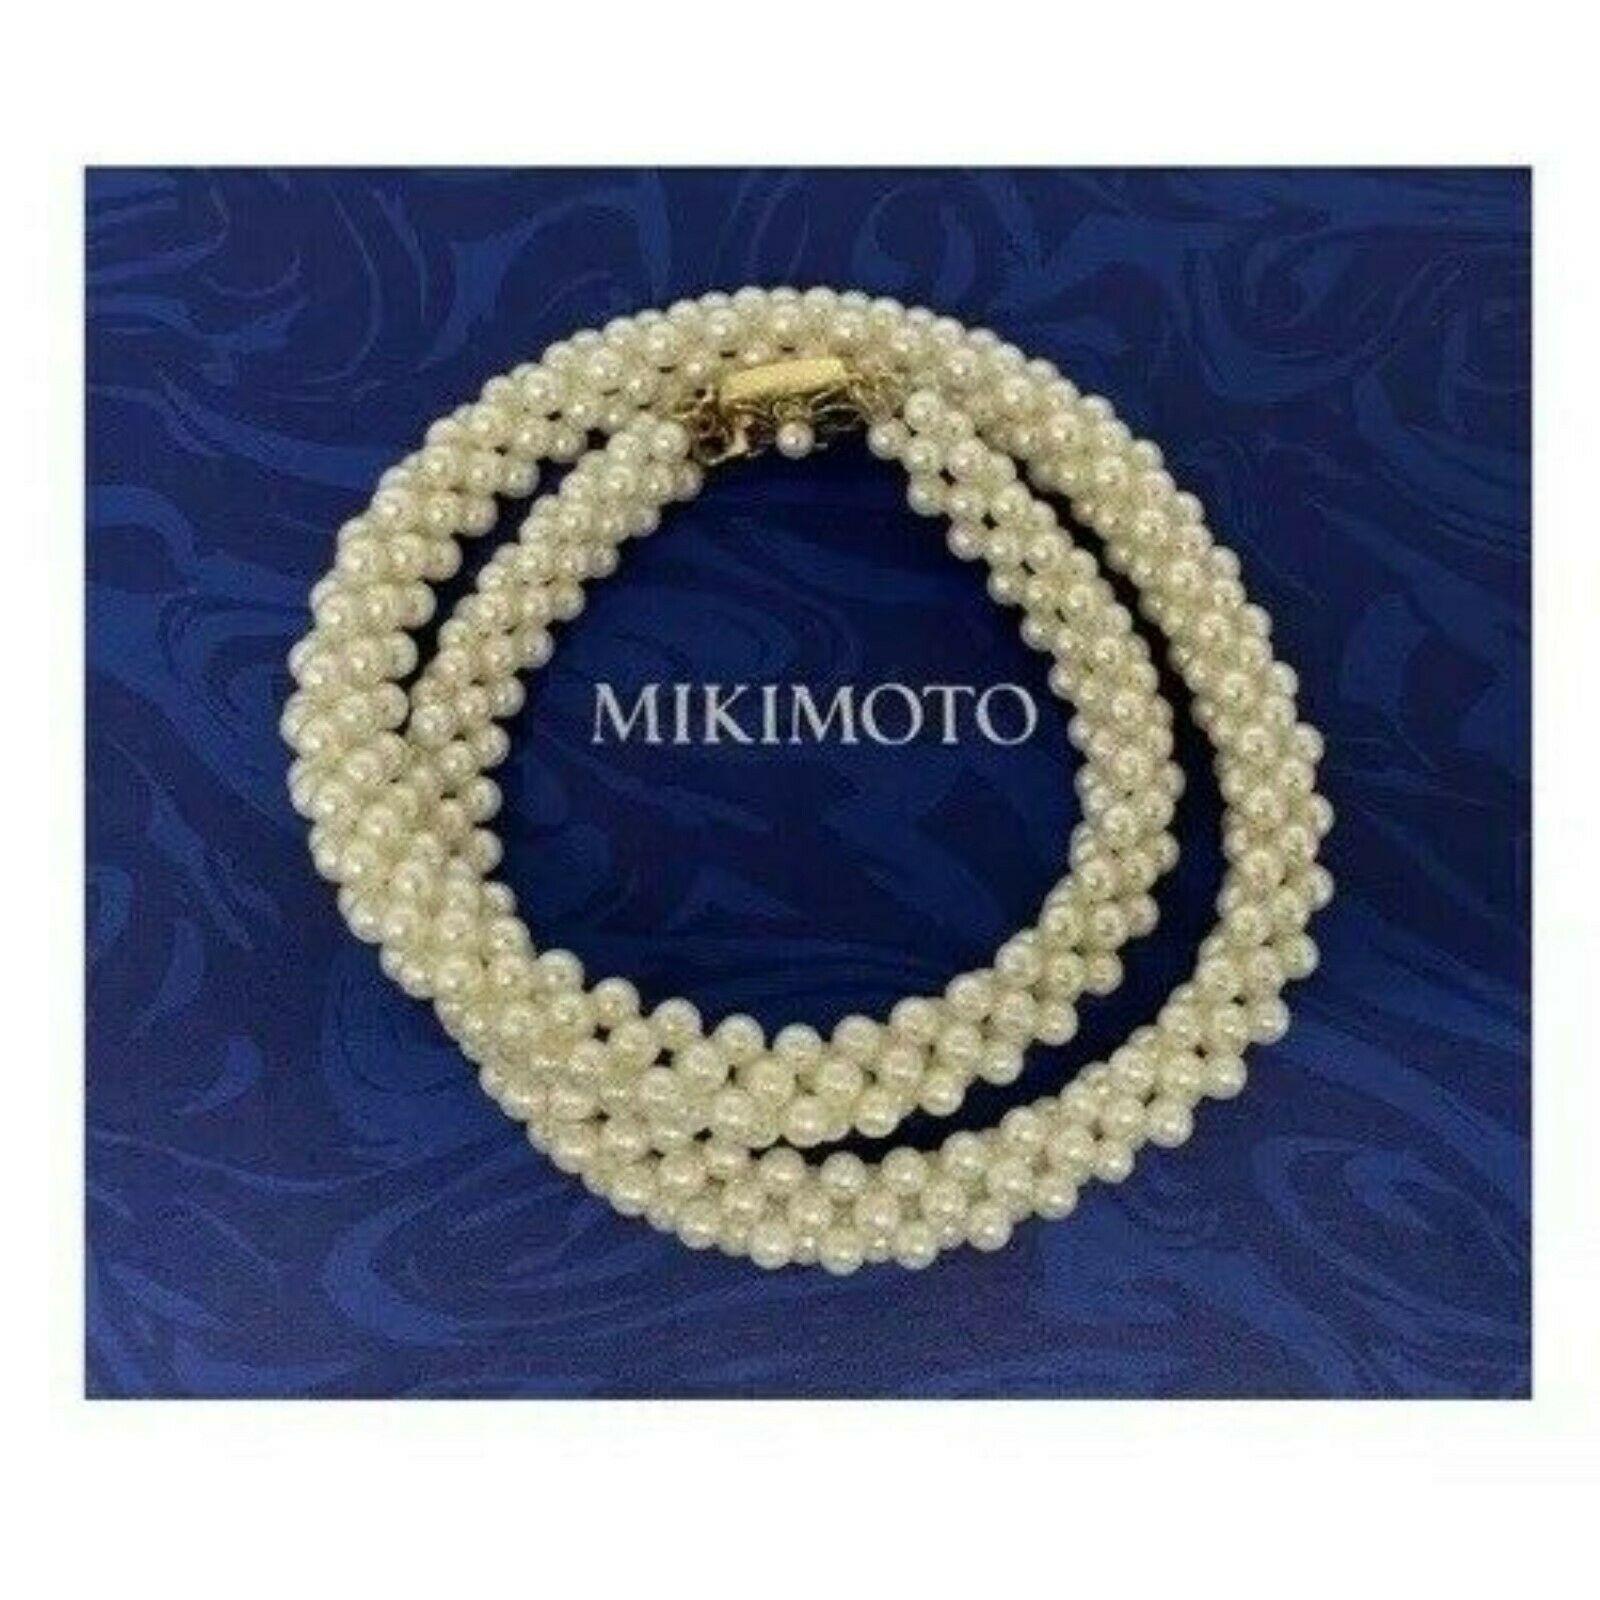 CERTIFIED ESTATE $8,950 RARE MIKIMOTO 3.9-3.8 MM BRAIDED 3 STRAND 17 IN 18KT AKOYA PEARL NECKLACE

This is a One of a Kind Unique Custom Made Glamorous Piece of Jewelry!!

Nothing says, “I Love ❤️ you” more than Diamonds and Pearls‼️

This GLAMOROUS